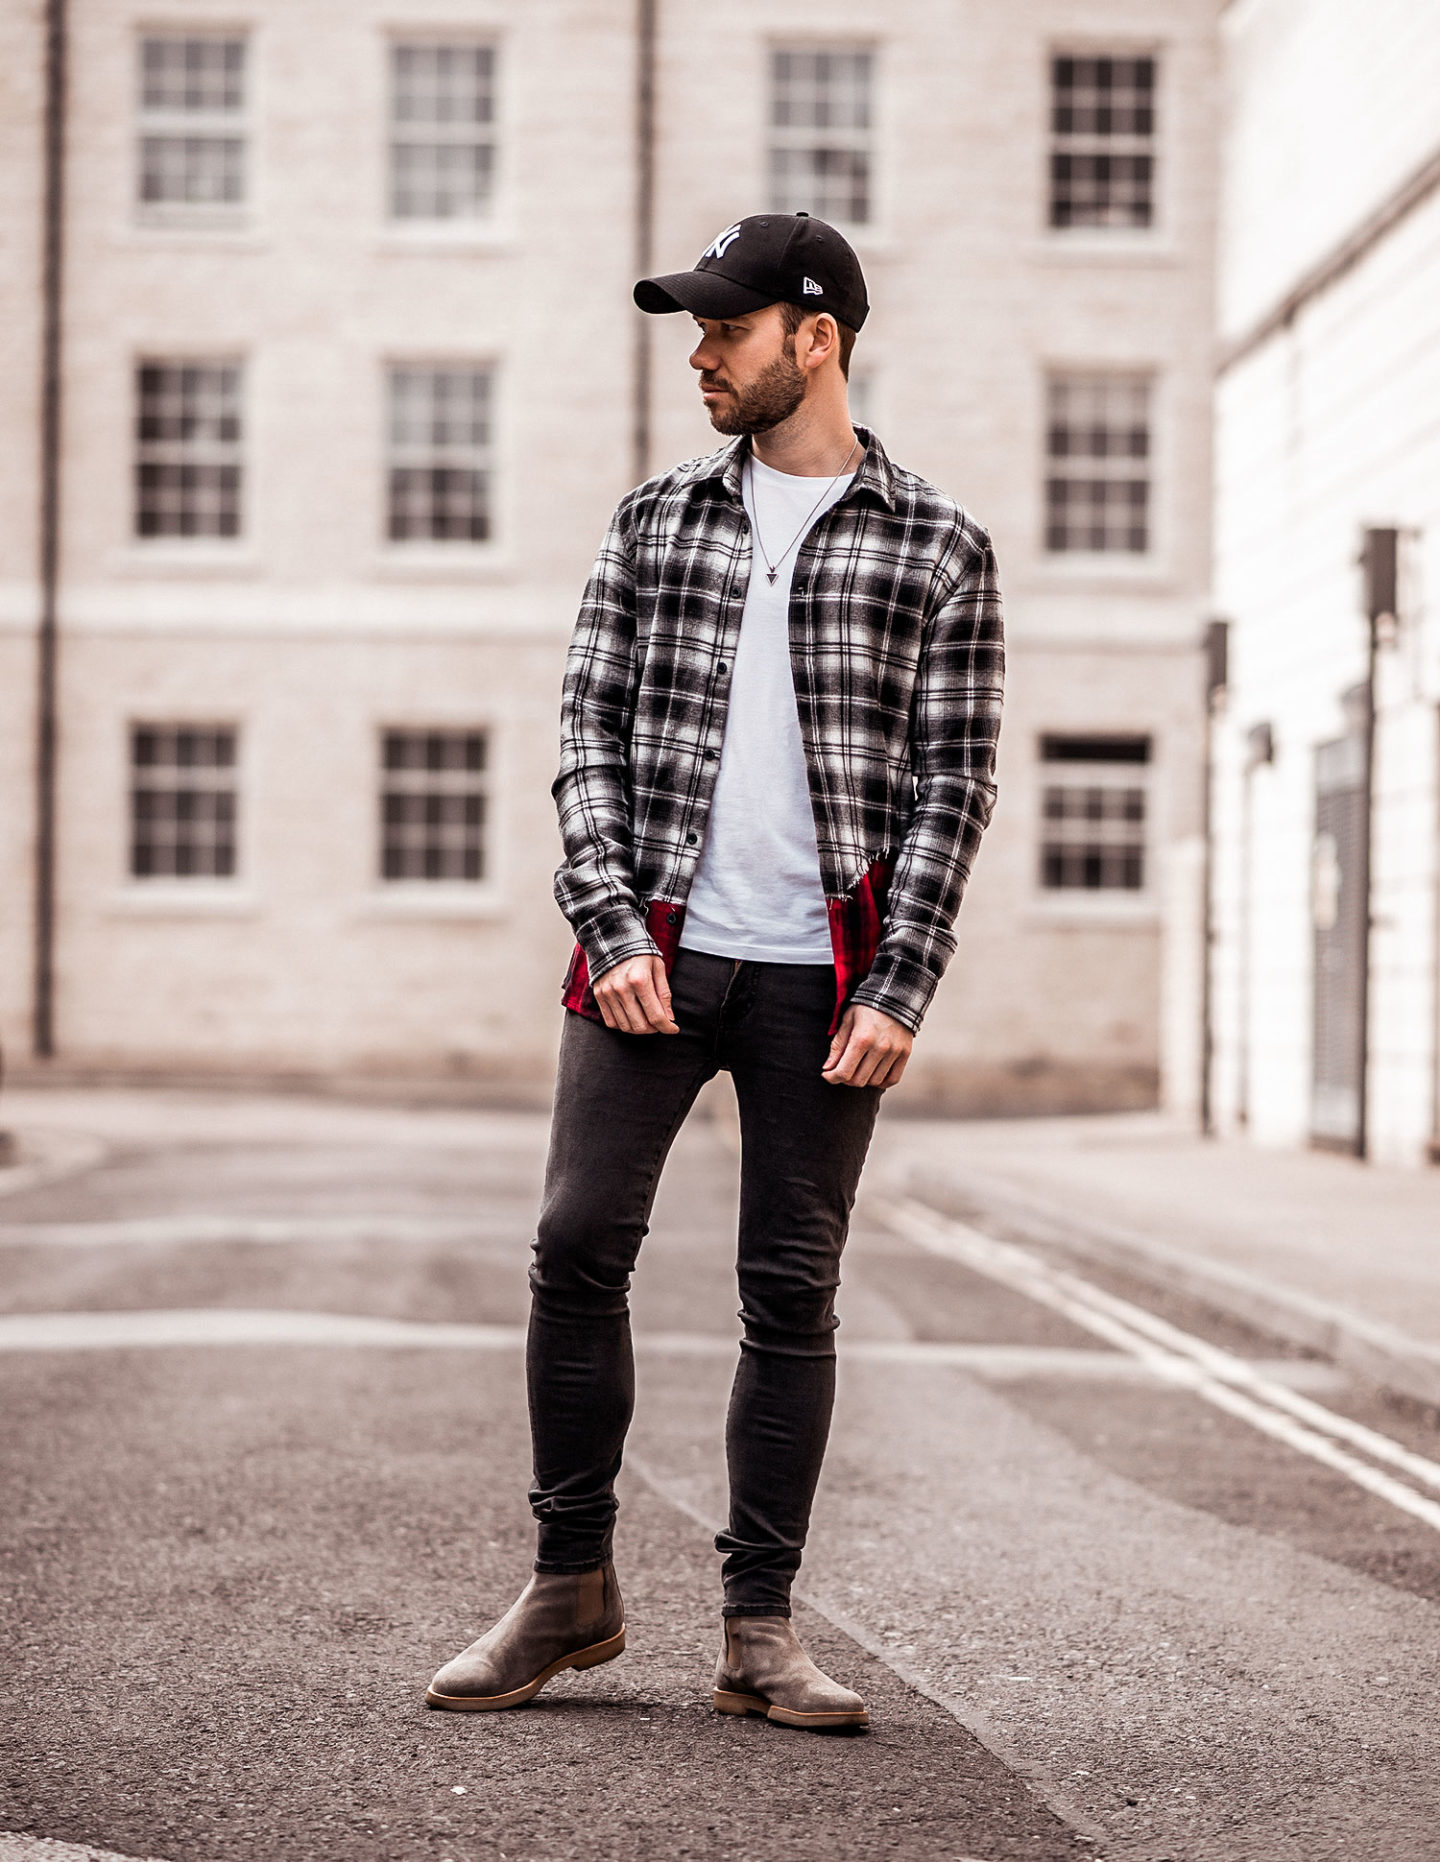 Black & Red Check Shirt Outfit | Your Average Guy